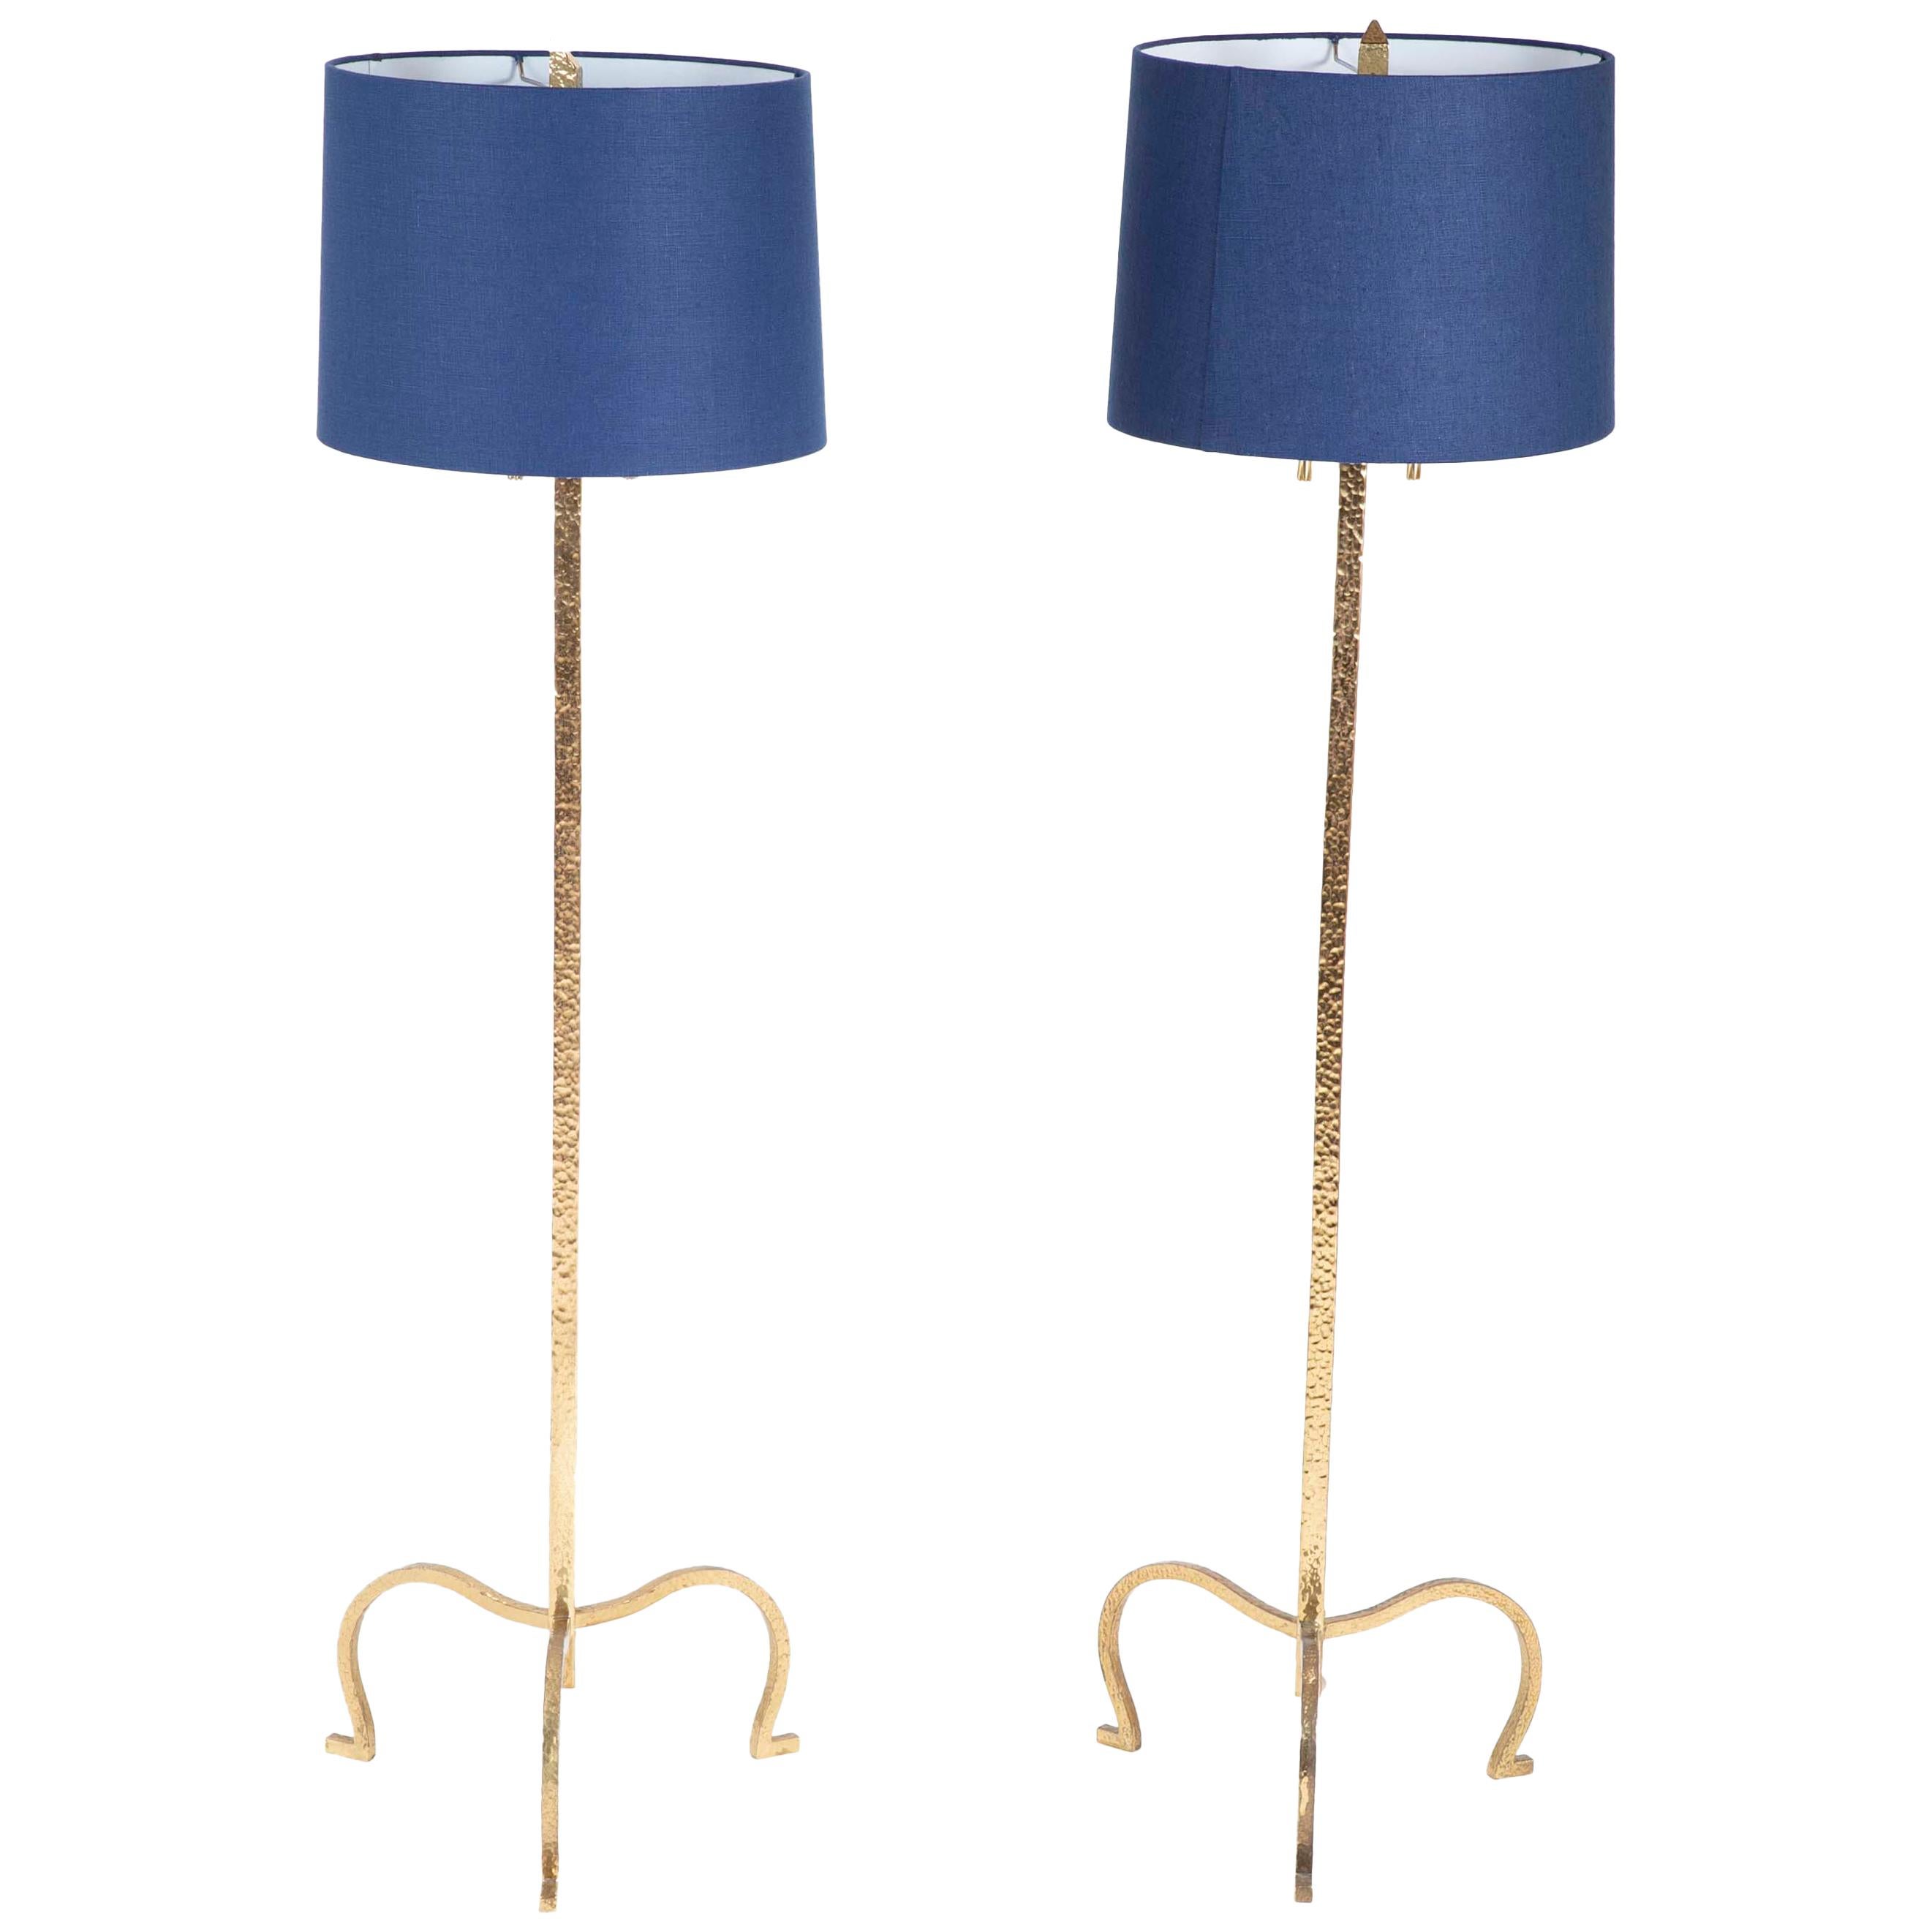 Pair of Gilt Peened Brass Floor Lamps in the Manner of Tommi Parzinger